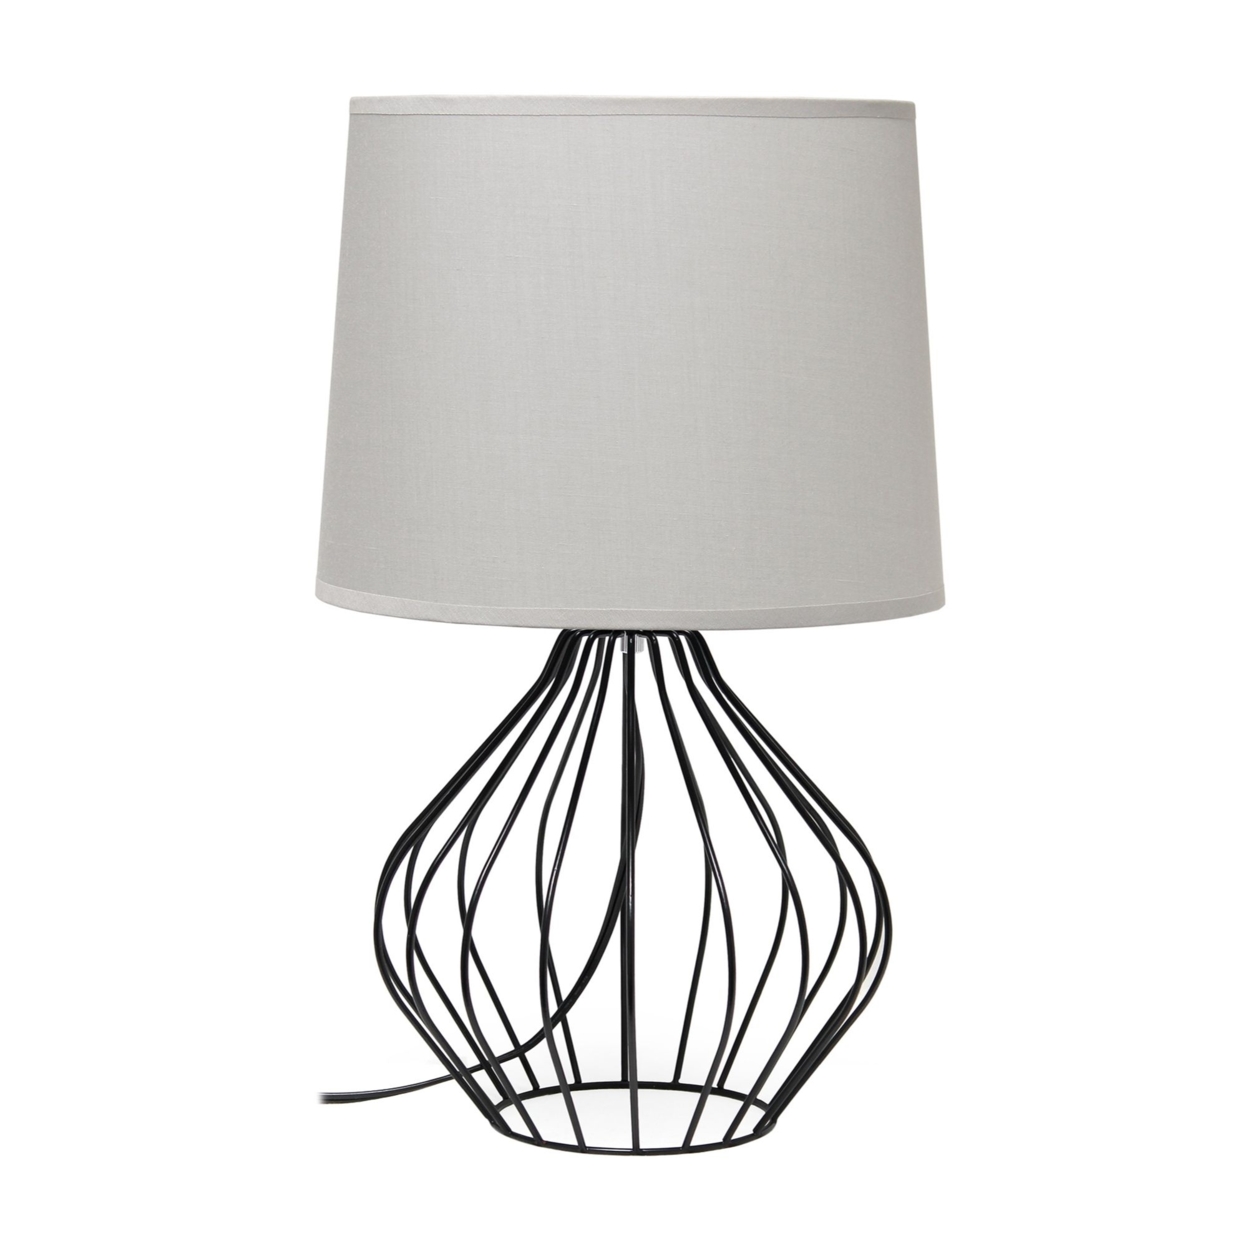 Simple Designs Geometrically Wired Table Lamp, Gray on Black